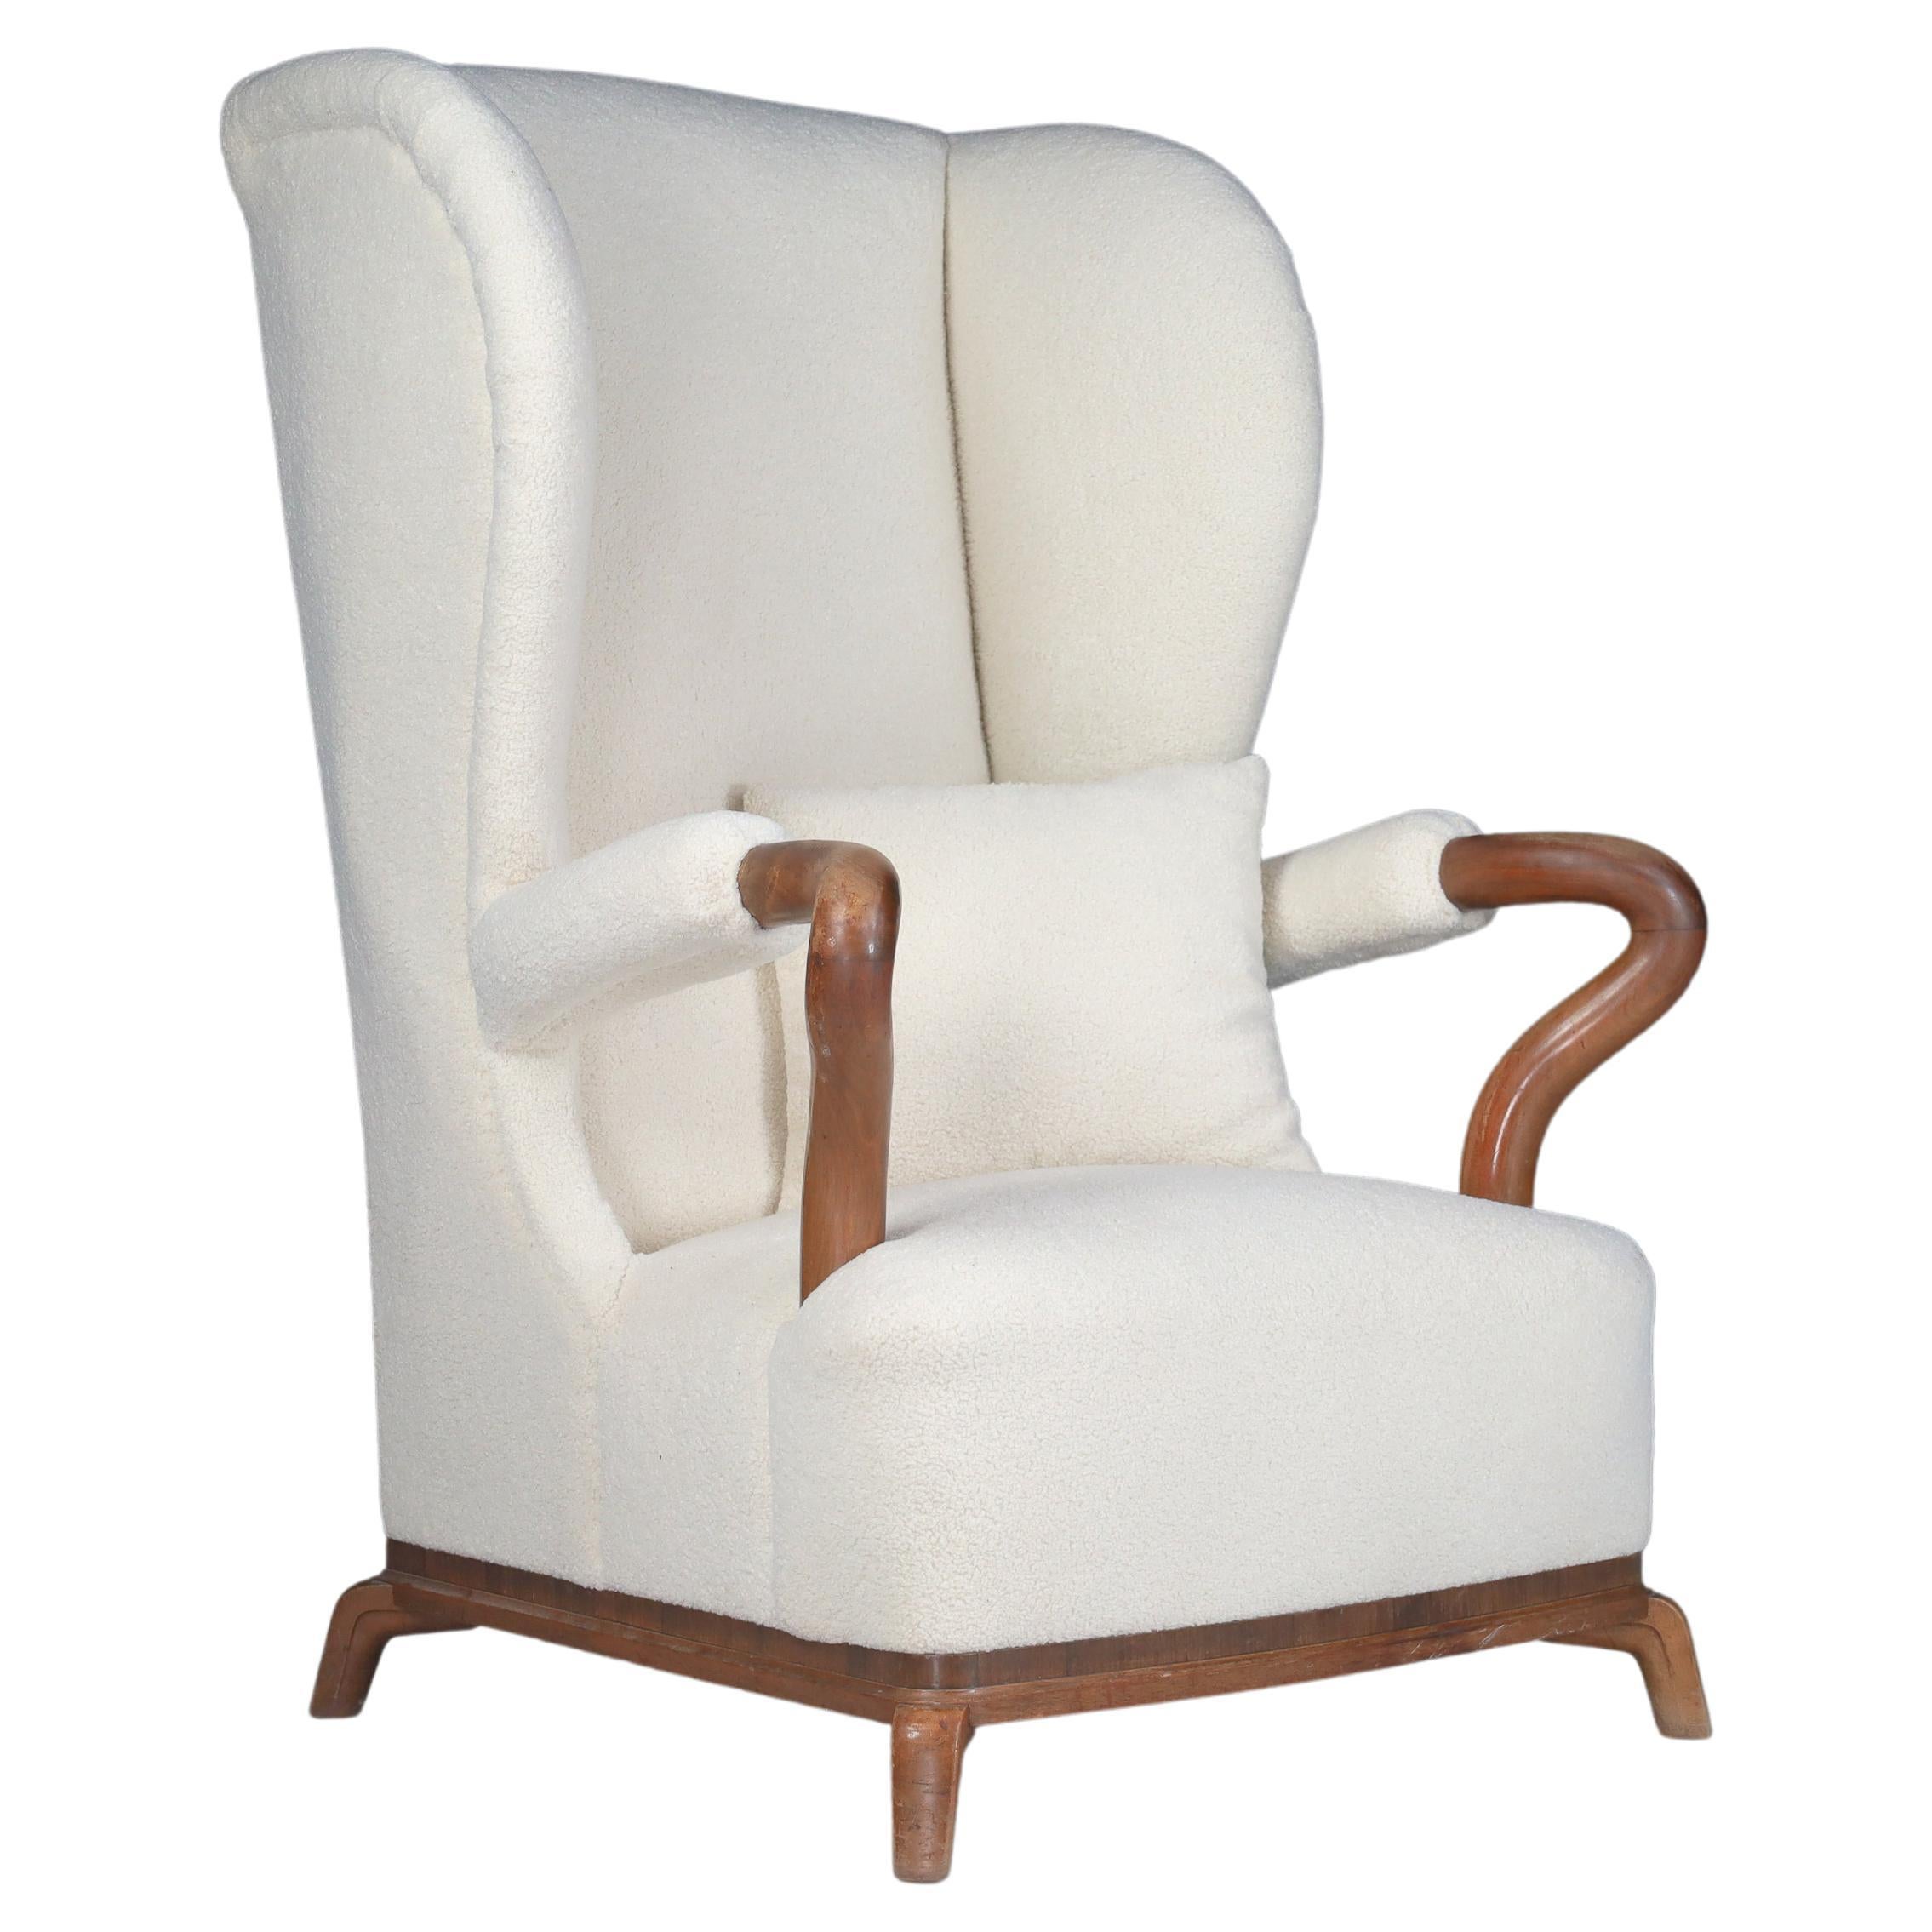 Large Monumental Wingback Armchair in Re-upholstered Teddy Fabric, France 1930s For Sale